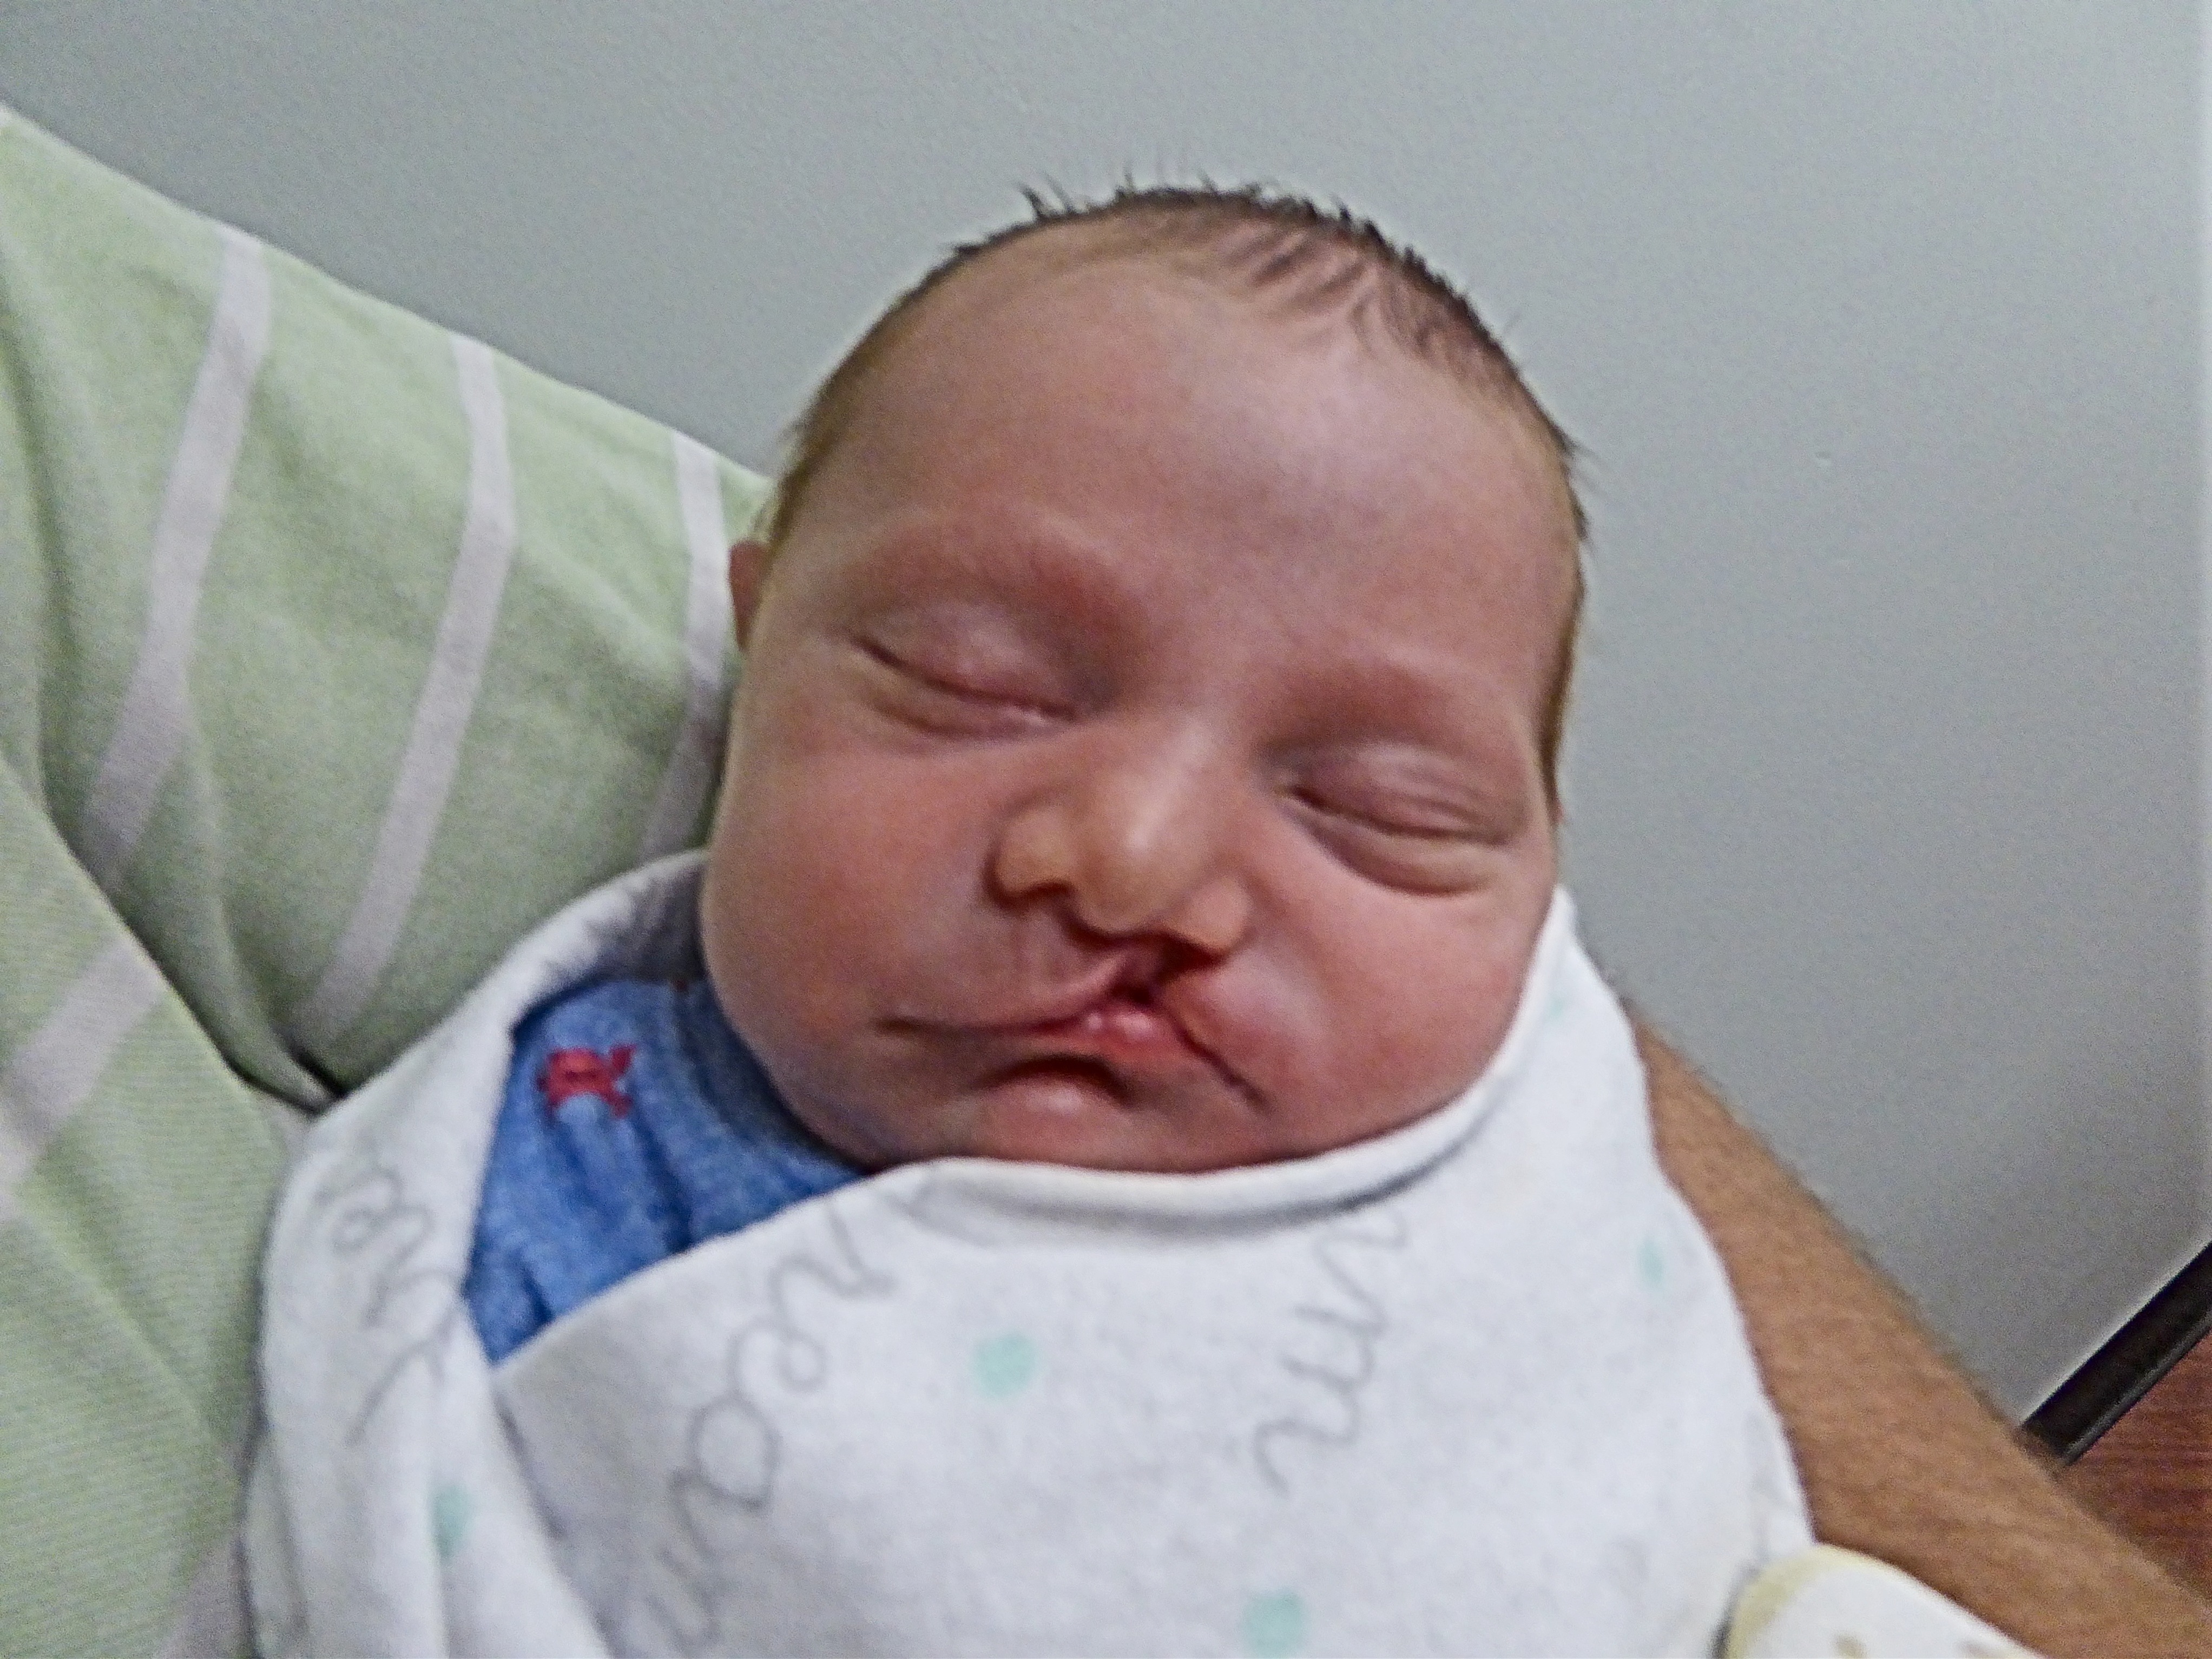 A baby with a cleft lip lies sleeping in a man’s arms. The baby is wrapped in a thin blanket and is wearing pajamas.